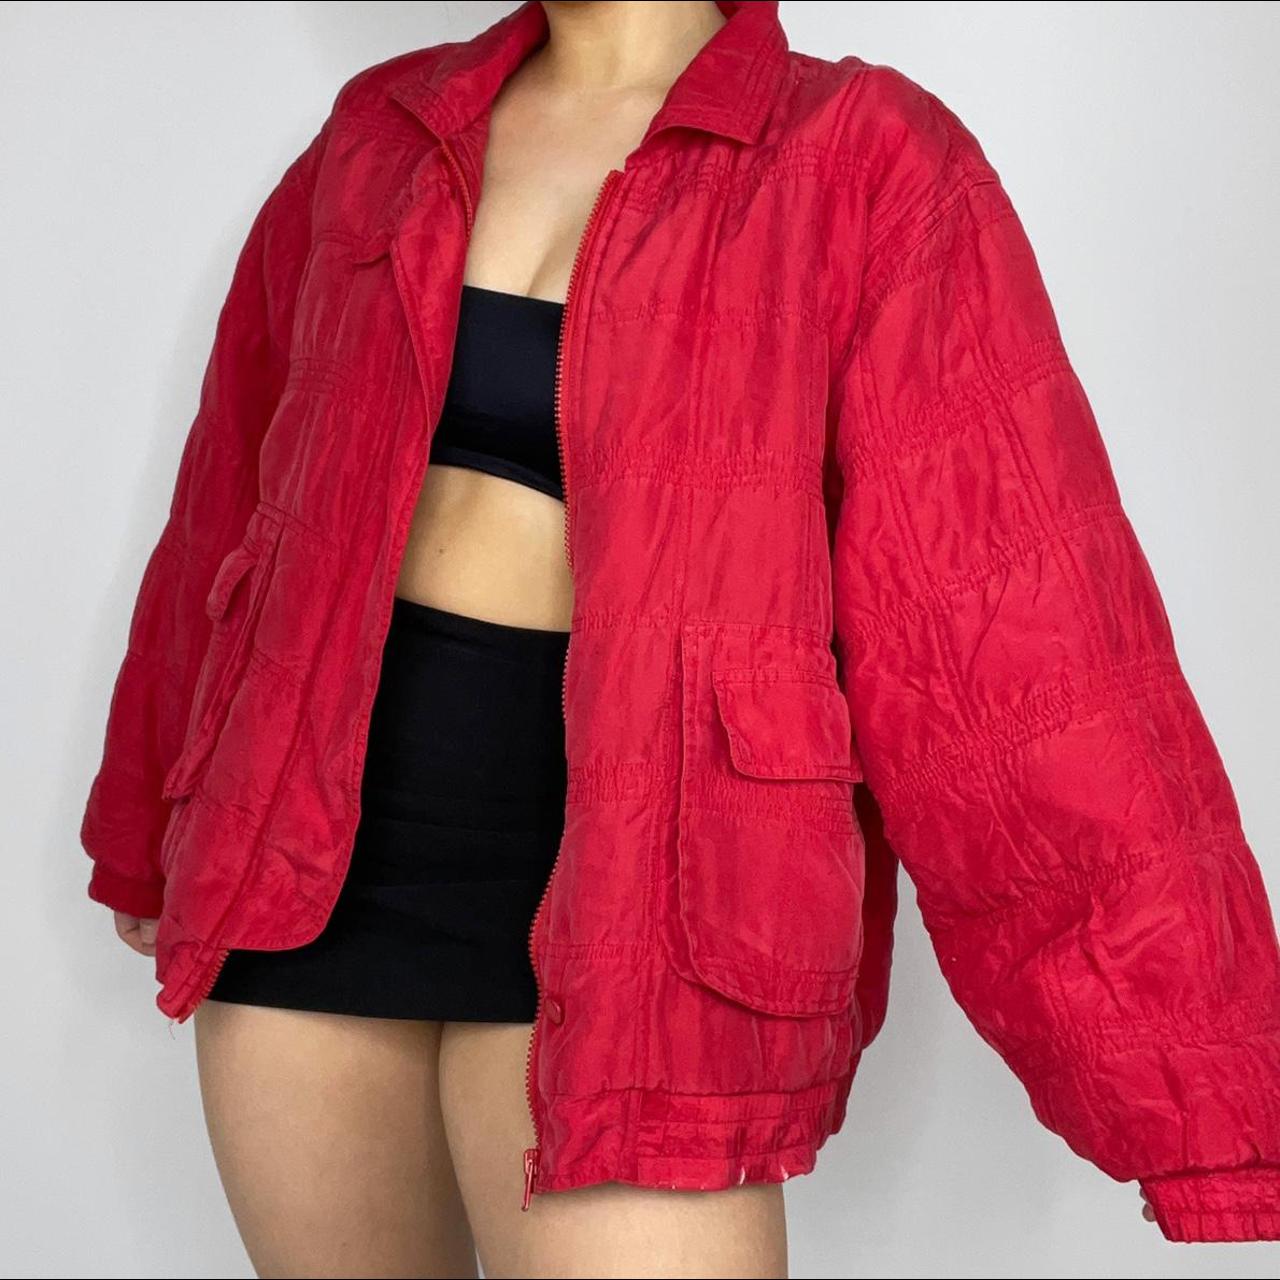 Product Image 2 - Vintage puffer jacket 🌞

Quilted puffer